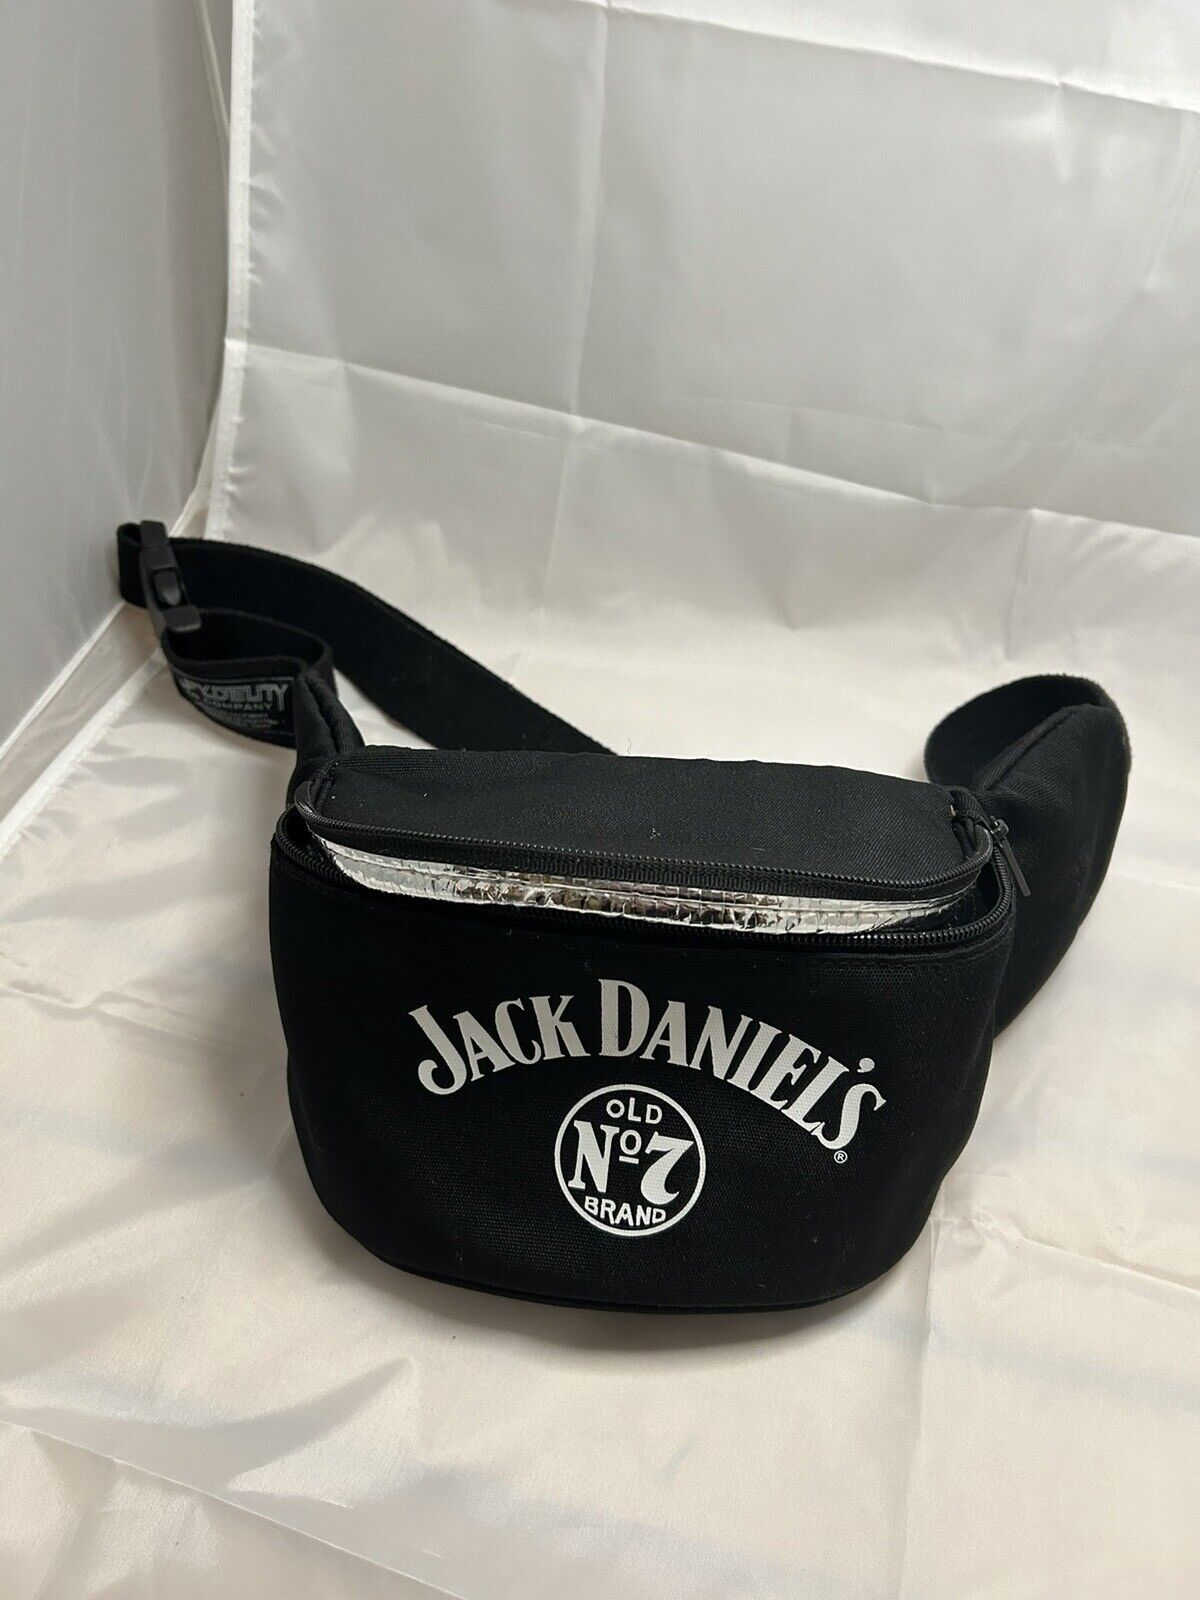 Jack Daniels No 7 Beer Fanny Pack Insulated Cooler - Holds 3 Cans